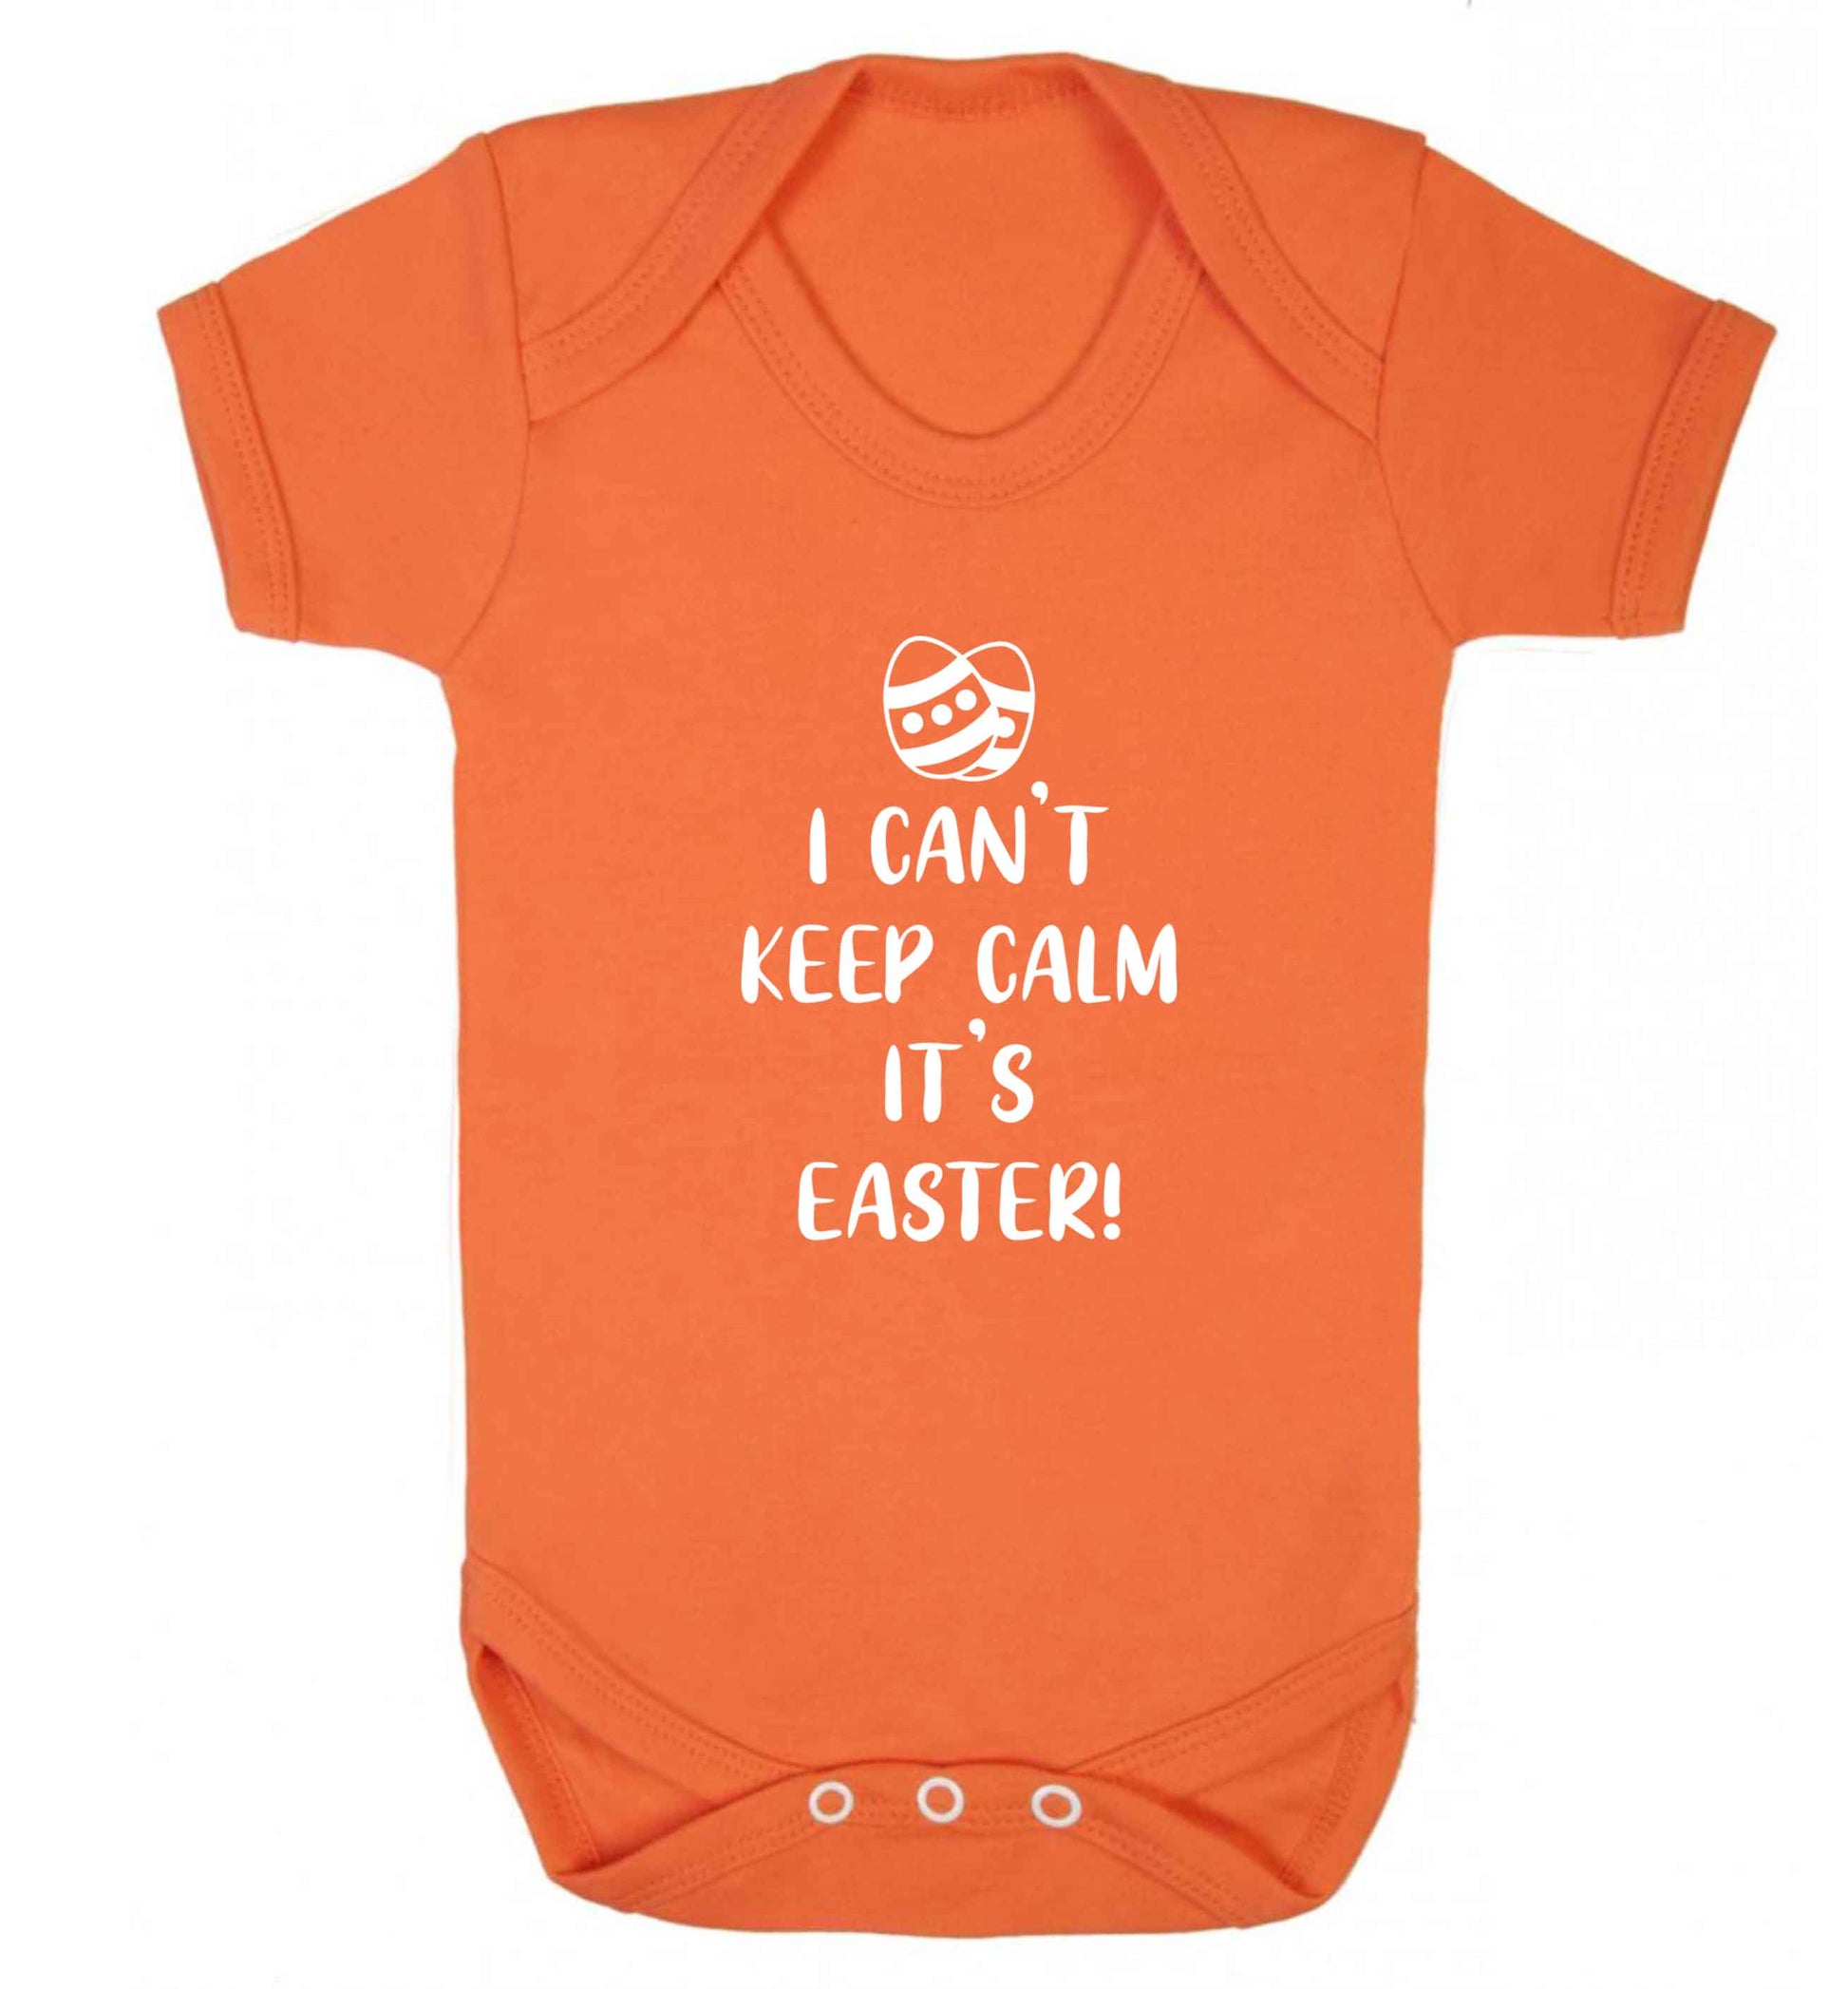 I can't keep calm it's Easter baby vest orange 18-24 months